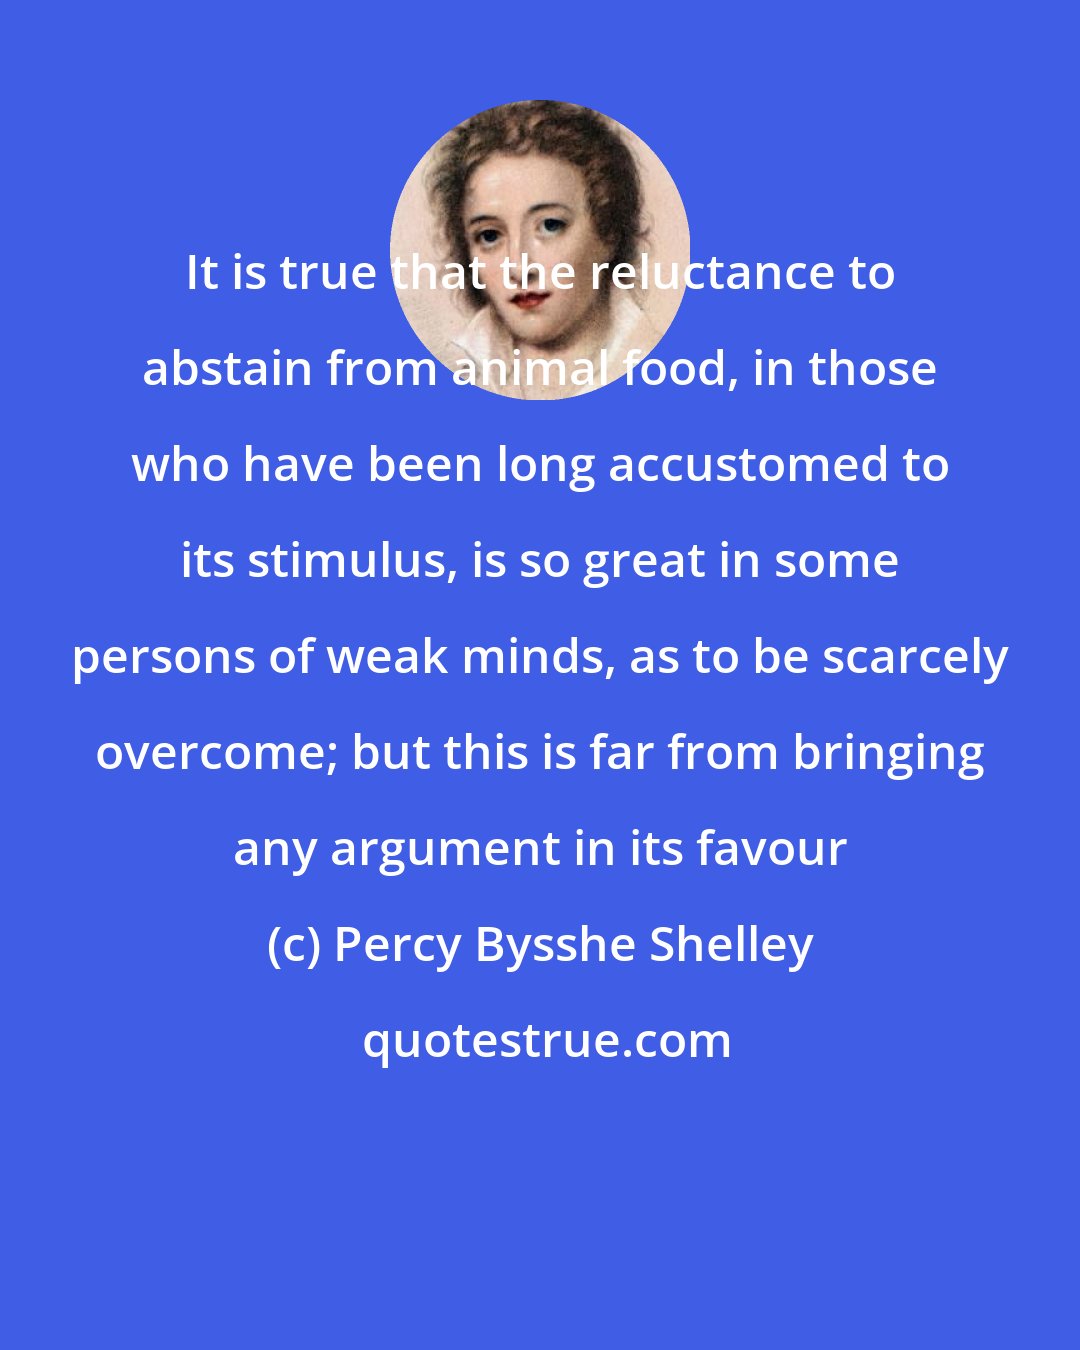 Percy Bysshe Shelley: It is true that the reluctance to abstain from animal food, in those who have been long accustomed to its stimulus, is so great in some persons of weak minds, as to be scarcely overcome; but this is far from bringing any argument in its favour